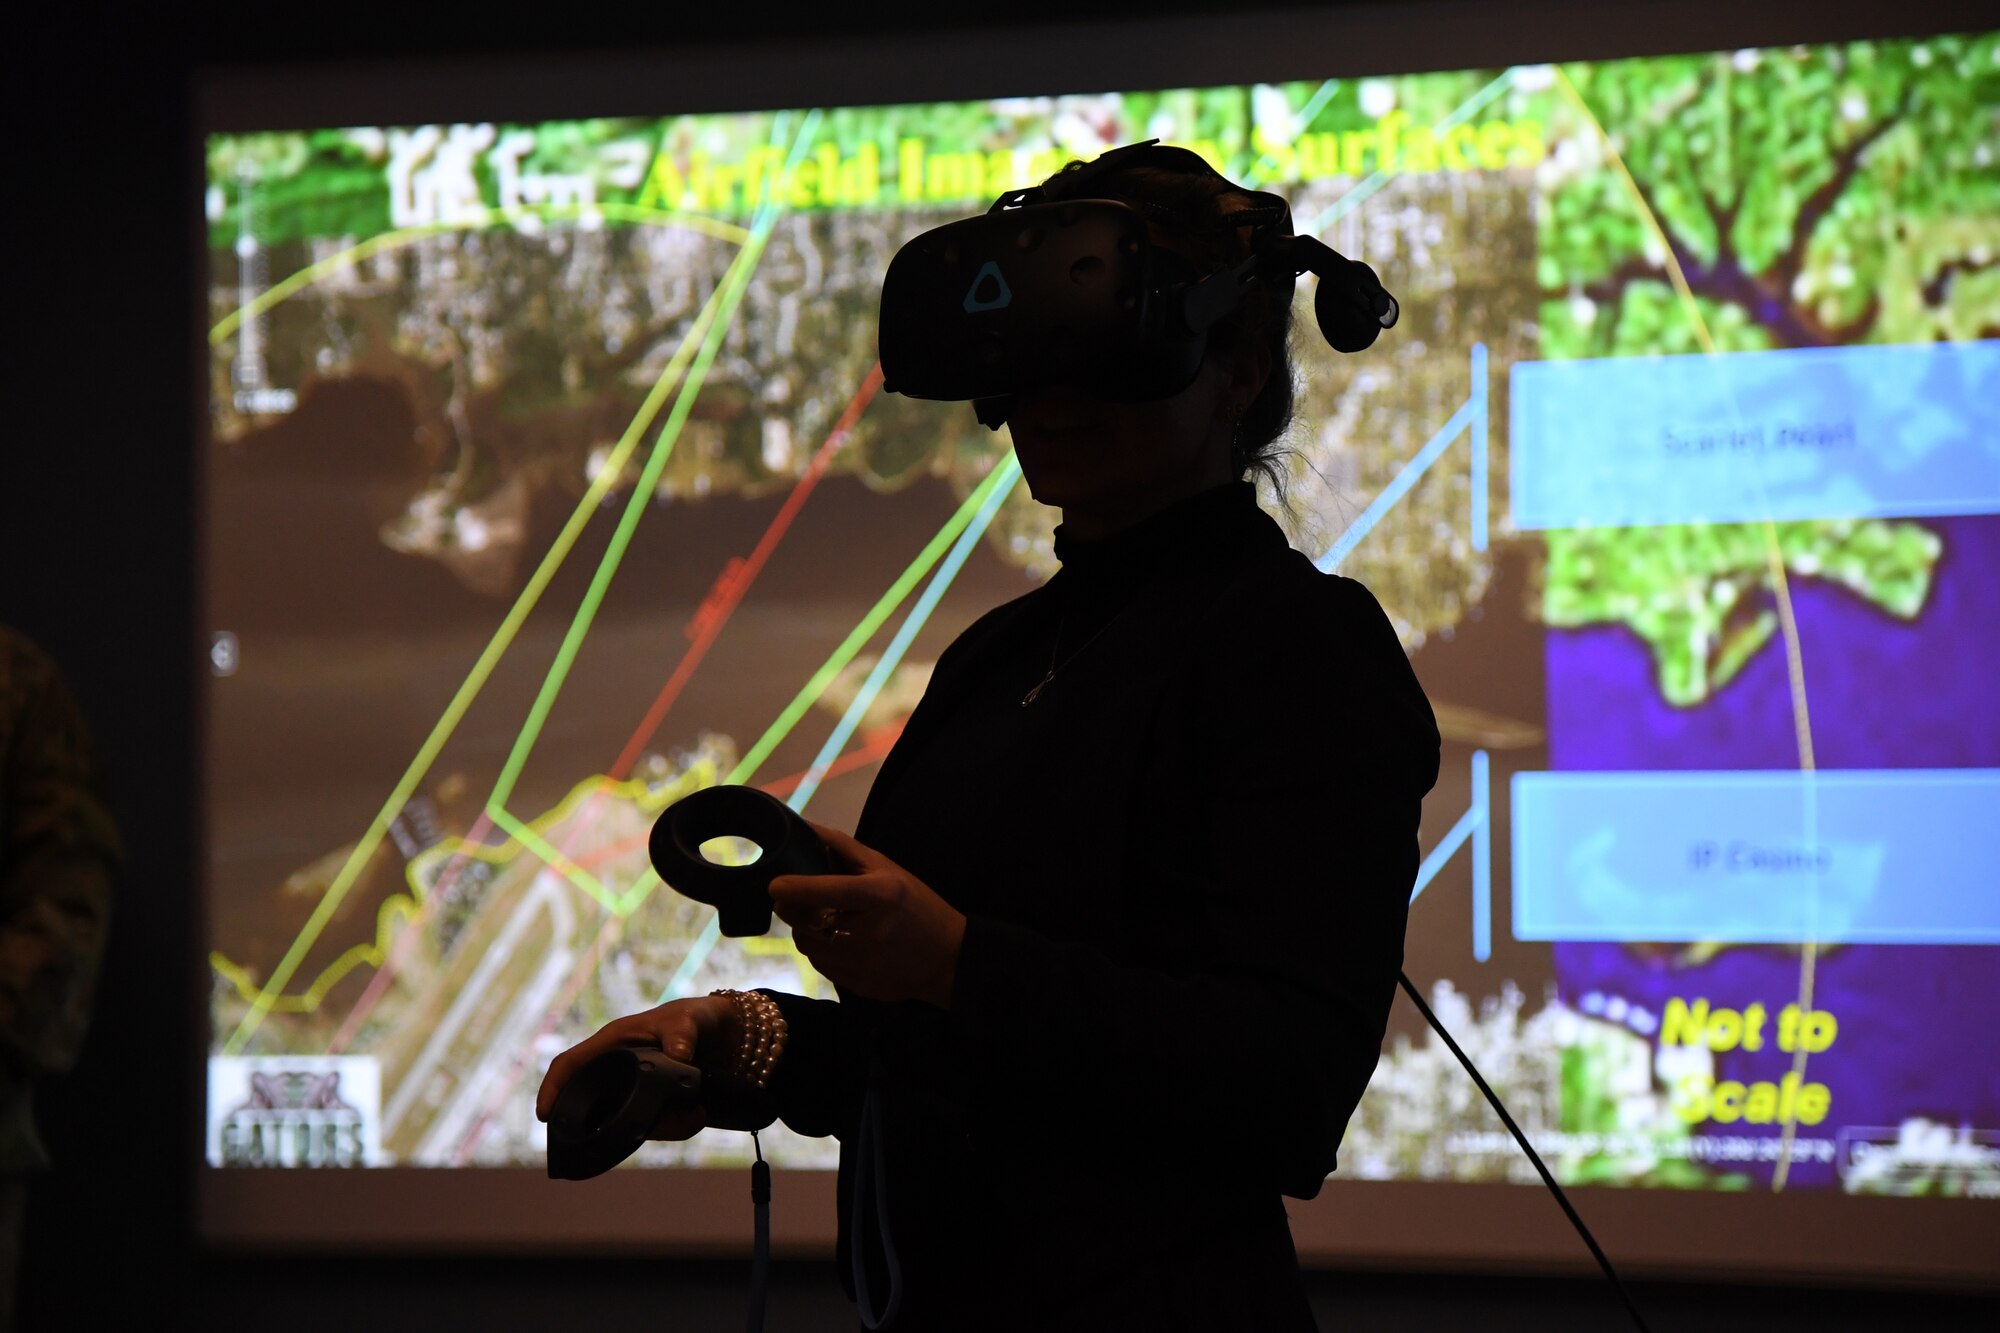 Leslie Robertson, D'Iberville, Mississippi, project coordinator, participates in an airfield management virtual reality demonstration during the airspace sustainability tour inside Cody Hall at Keesler Air Force Base, Mississippi, Jan. 23, 2019. Keesler hosted the community engagement for civic leaders to discuss Keesler's flying mission requirements in order to create processes which informs key decision makers regarding local development and to ensure compatible economic growth for the surrounding communities. (U.S. Air Force photo by Kemberly Groue)